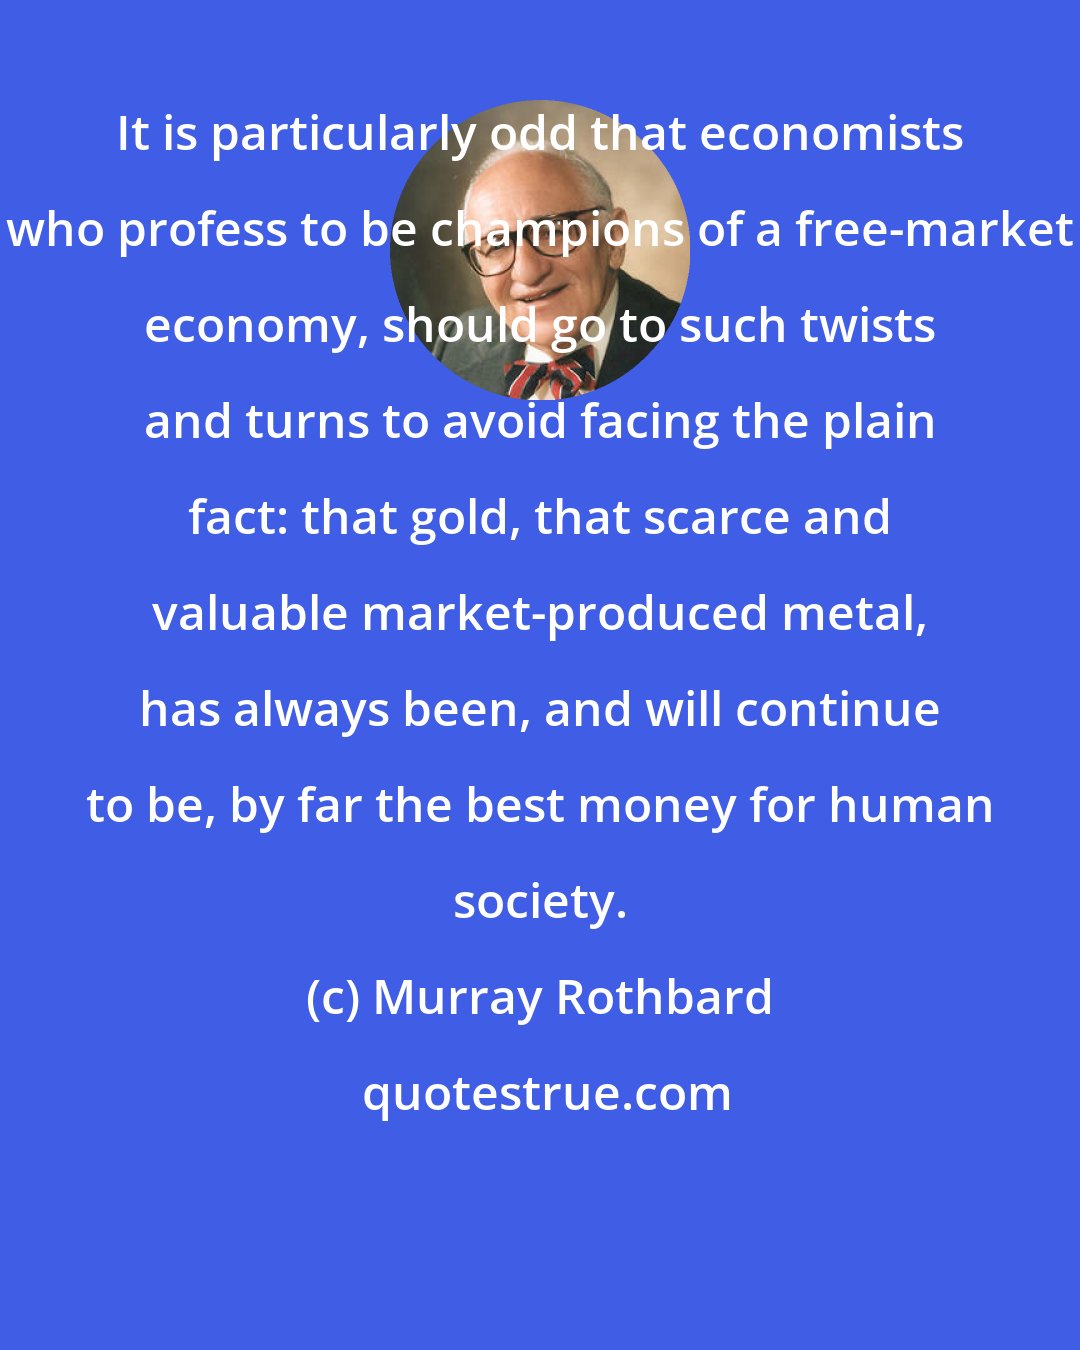 Murray Rothbard: It is particularly odd that economists who profess to be champions of a free-market economy, should go to such twists and turns to avoid facing the plain fact: that gold, that scarce and valuable market-produced metal, has always been, and will continue to be, by far the best money for human society.